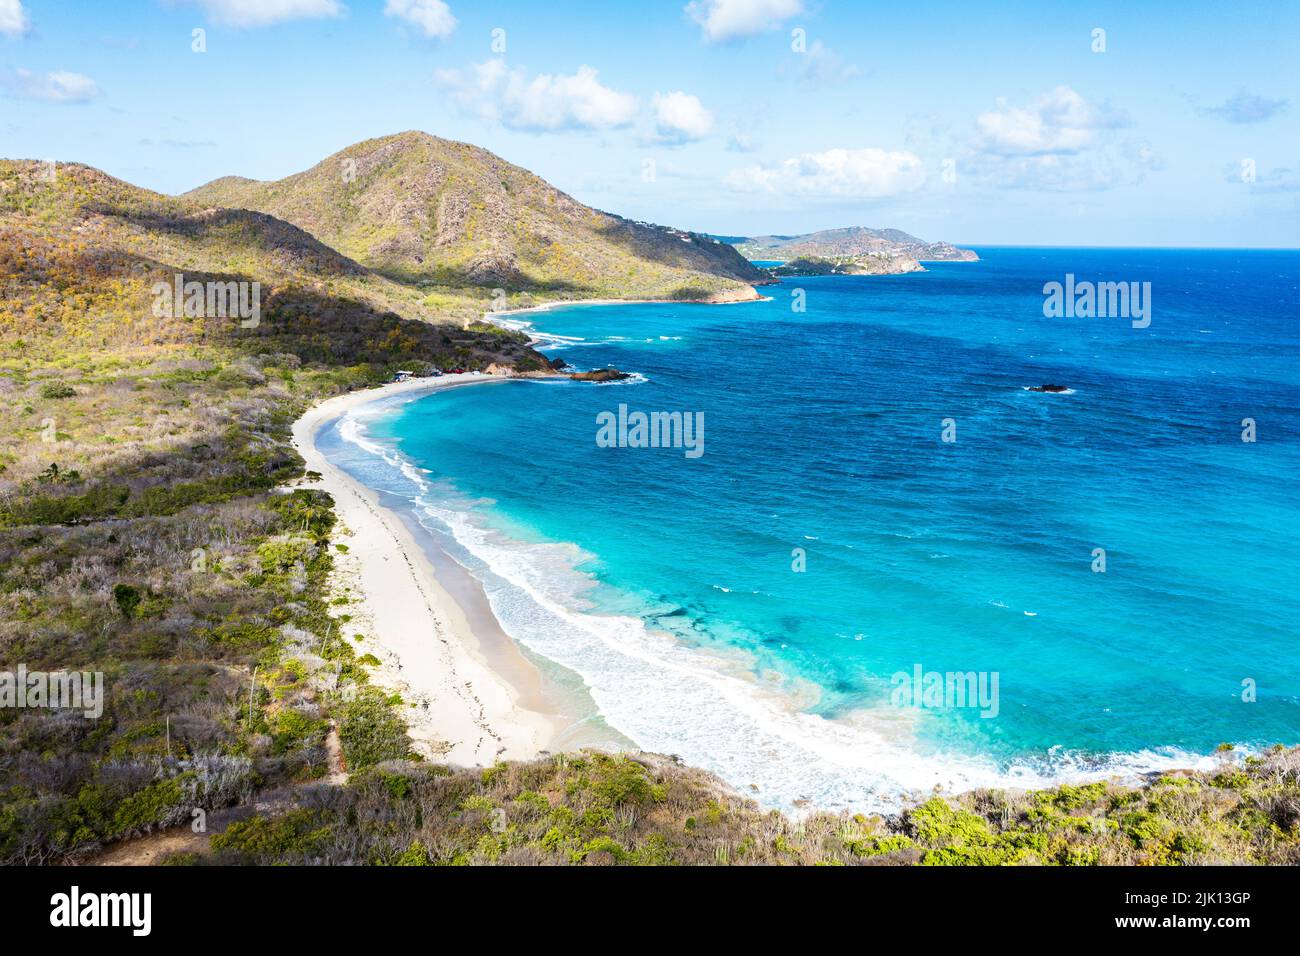 Overhead view of the crystal turquoise sea surrounding the idyllic Rendezvous Beach, Antigua, West Indies, Caribbean, Central America Stock Photo